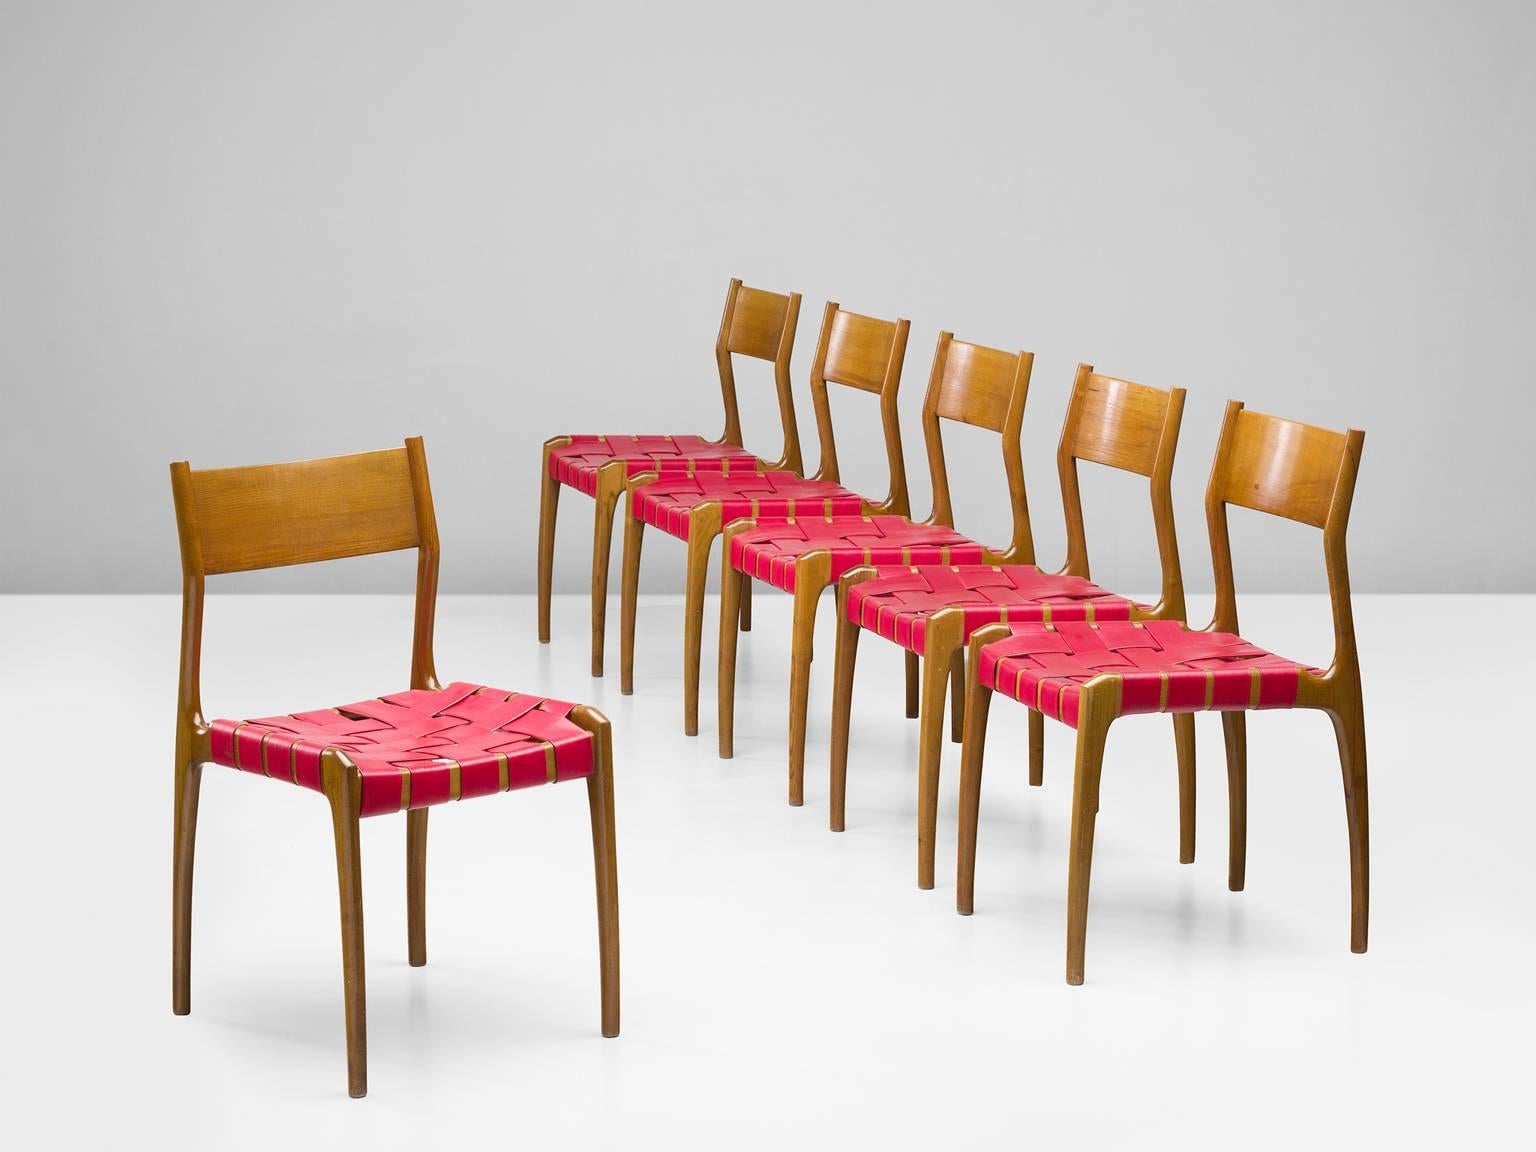 Set of six chairs, canvas and beach, Italy, 1950s.

This set of six chairs has a canvas webbing as its seat. The frame itself is executed in solid beech. Although these chairs appear to be straight and and minimalistic, the frame shows some organic,